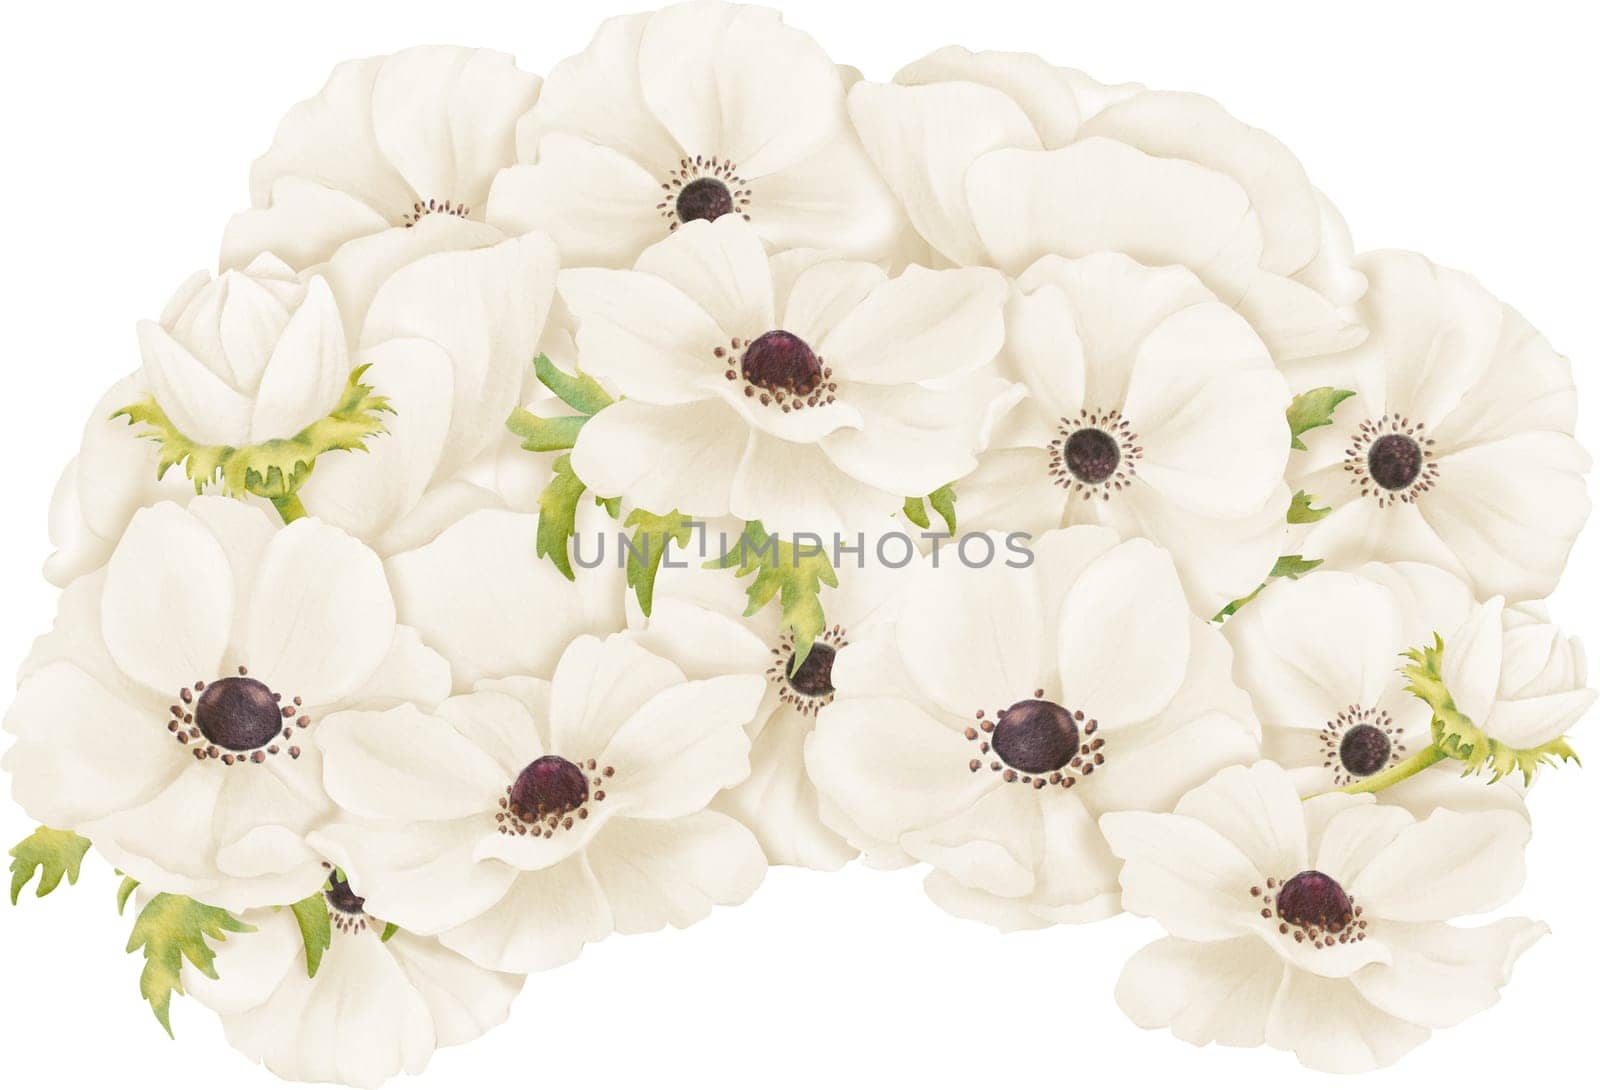 illustration featuring white anemones arranged in a composition. This artwork is for use in greeting card designs, web design, advertising.